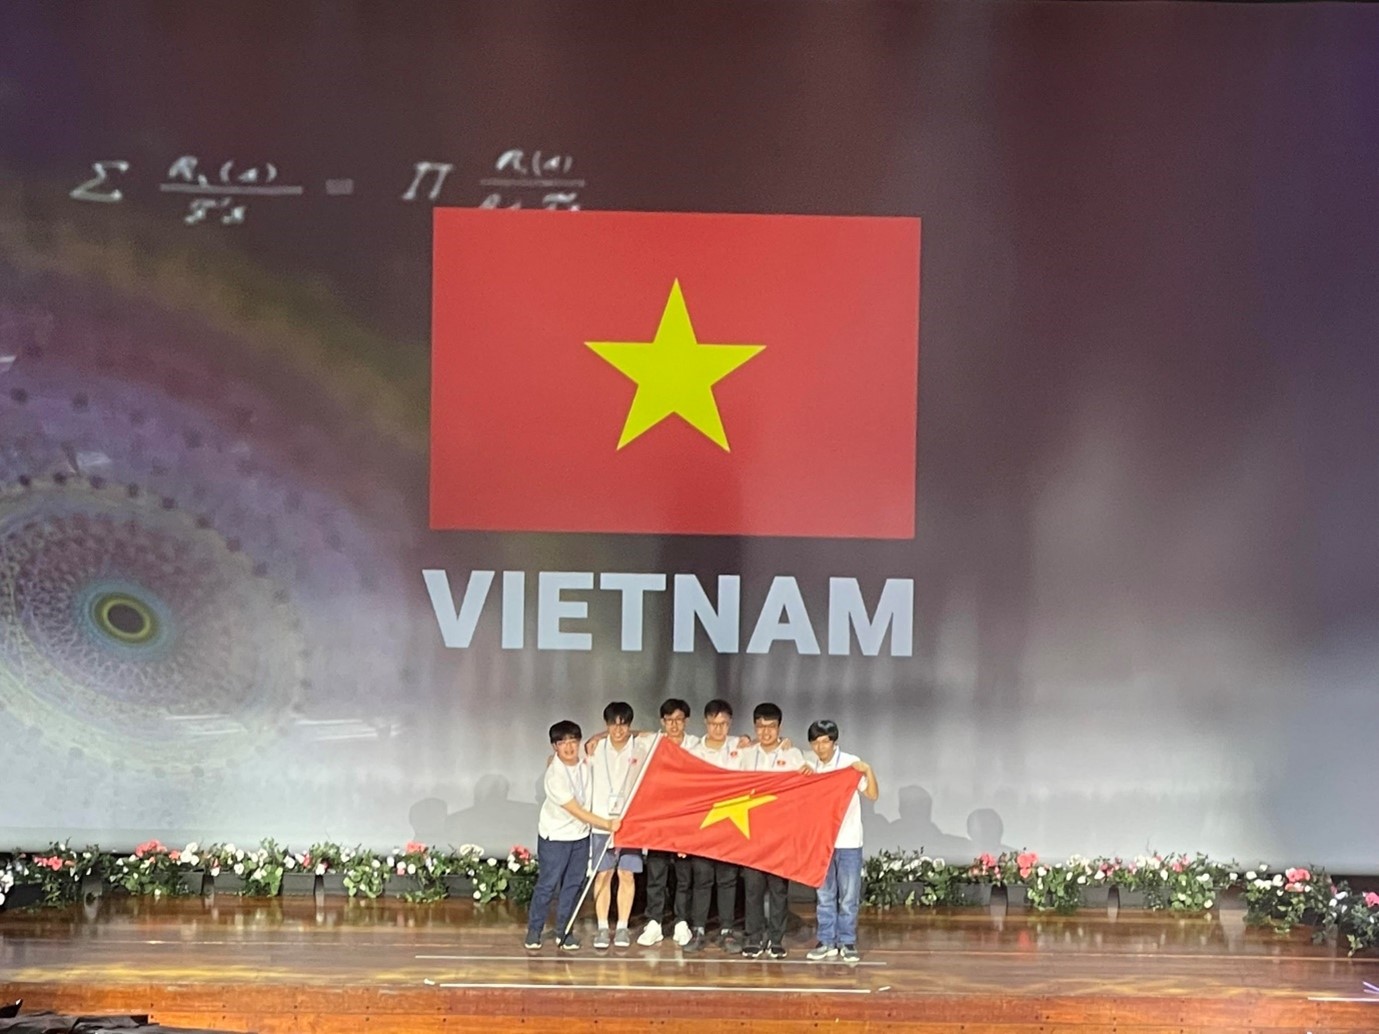 Vietnamese student gets maximum score at Int’l Math Olympiad after 20 years